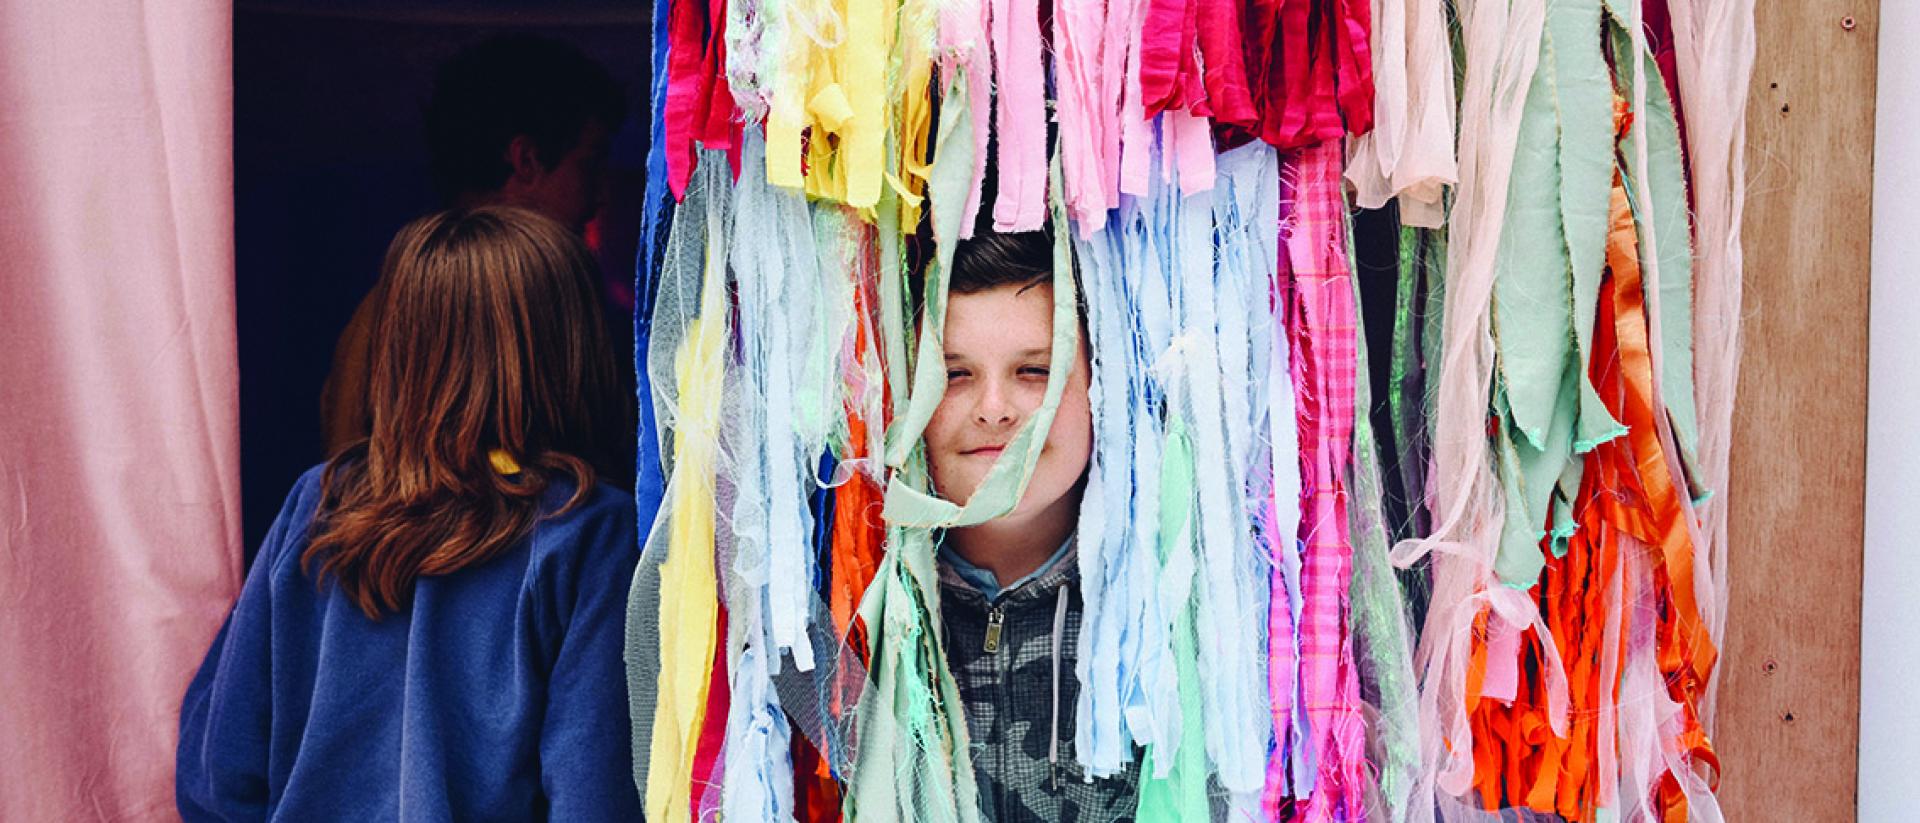 Children playing with colourful rags